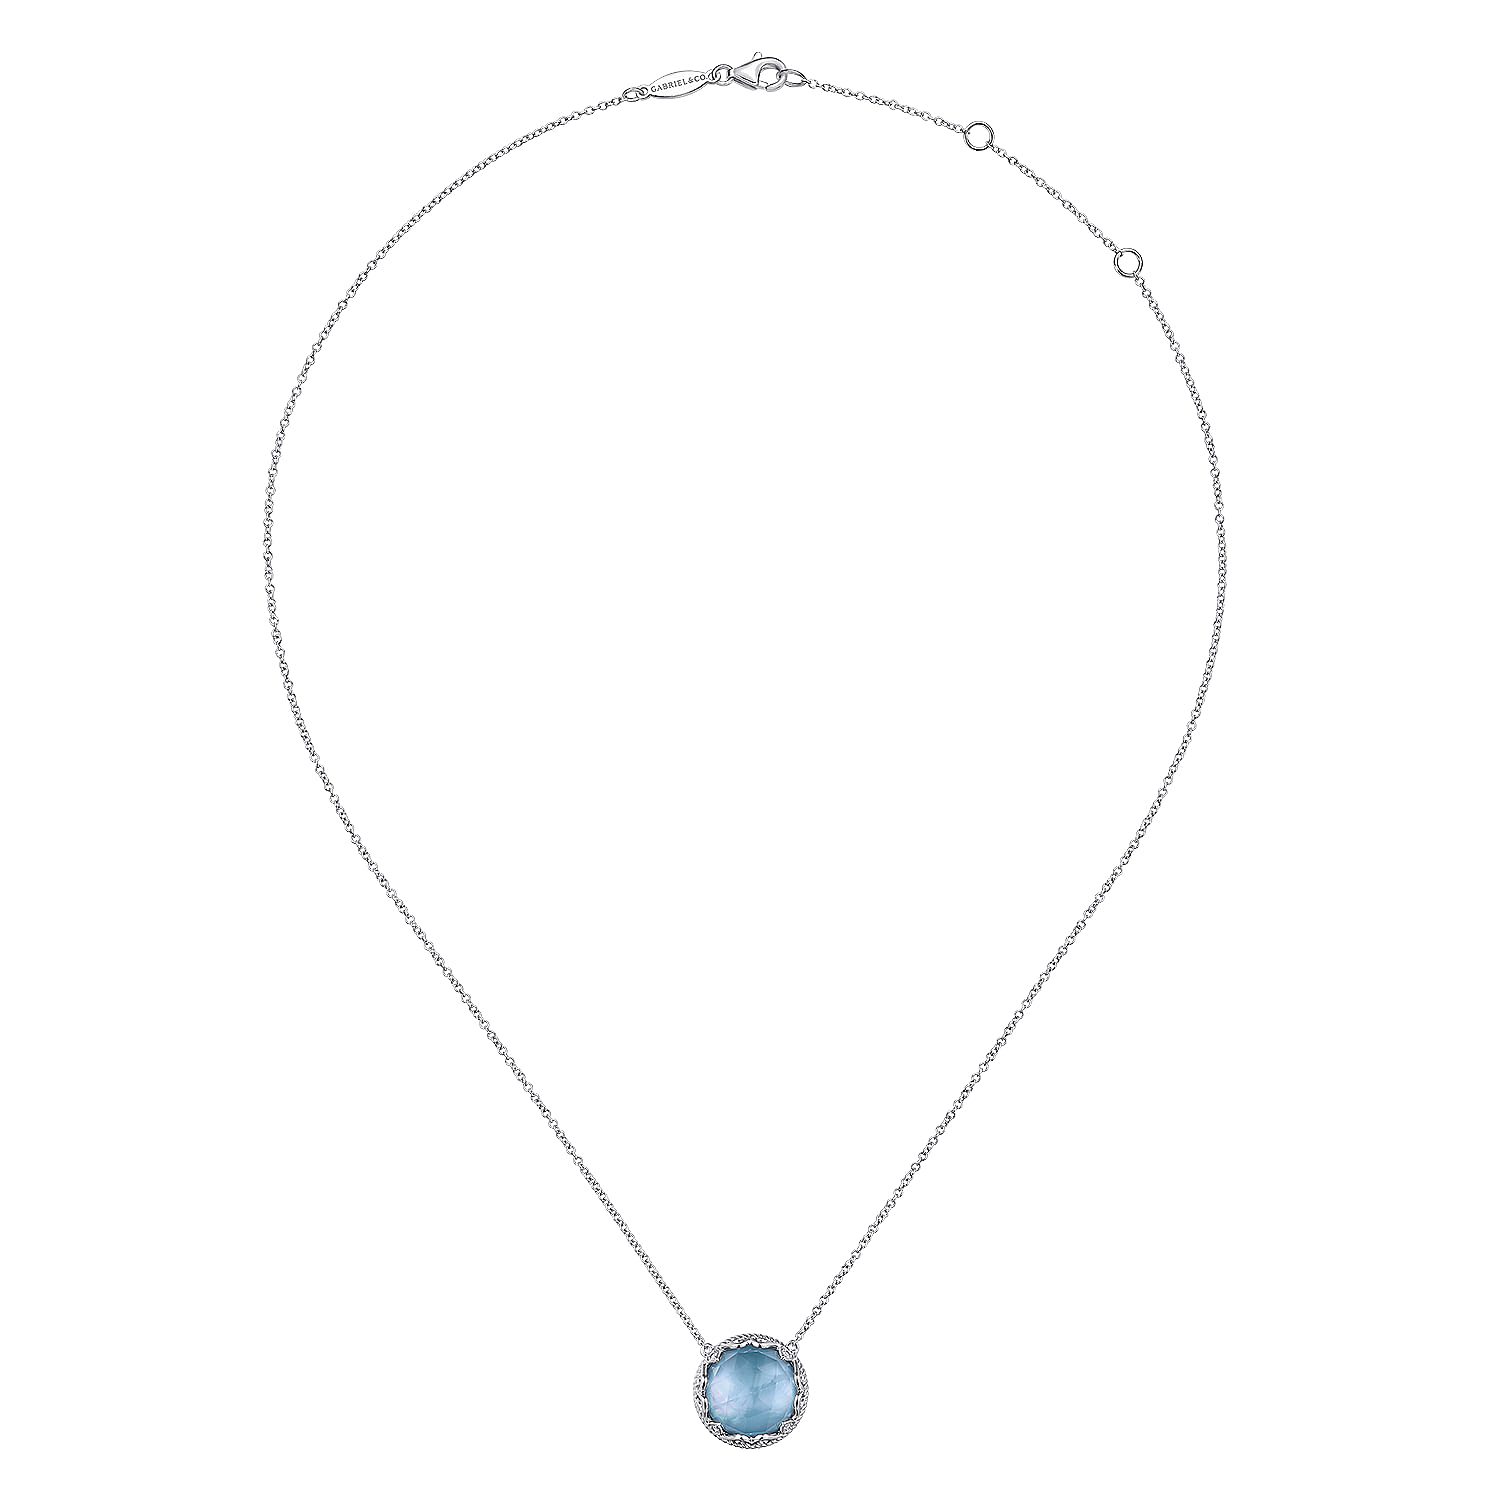 925 Sterling Silver Round Rock Crystal/MOP/Turquoise and White Sapphire Pendant Necklace